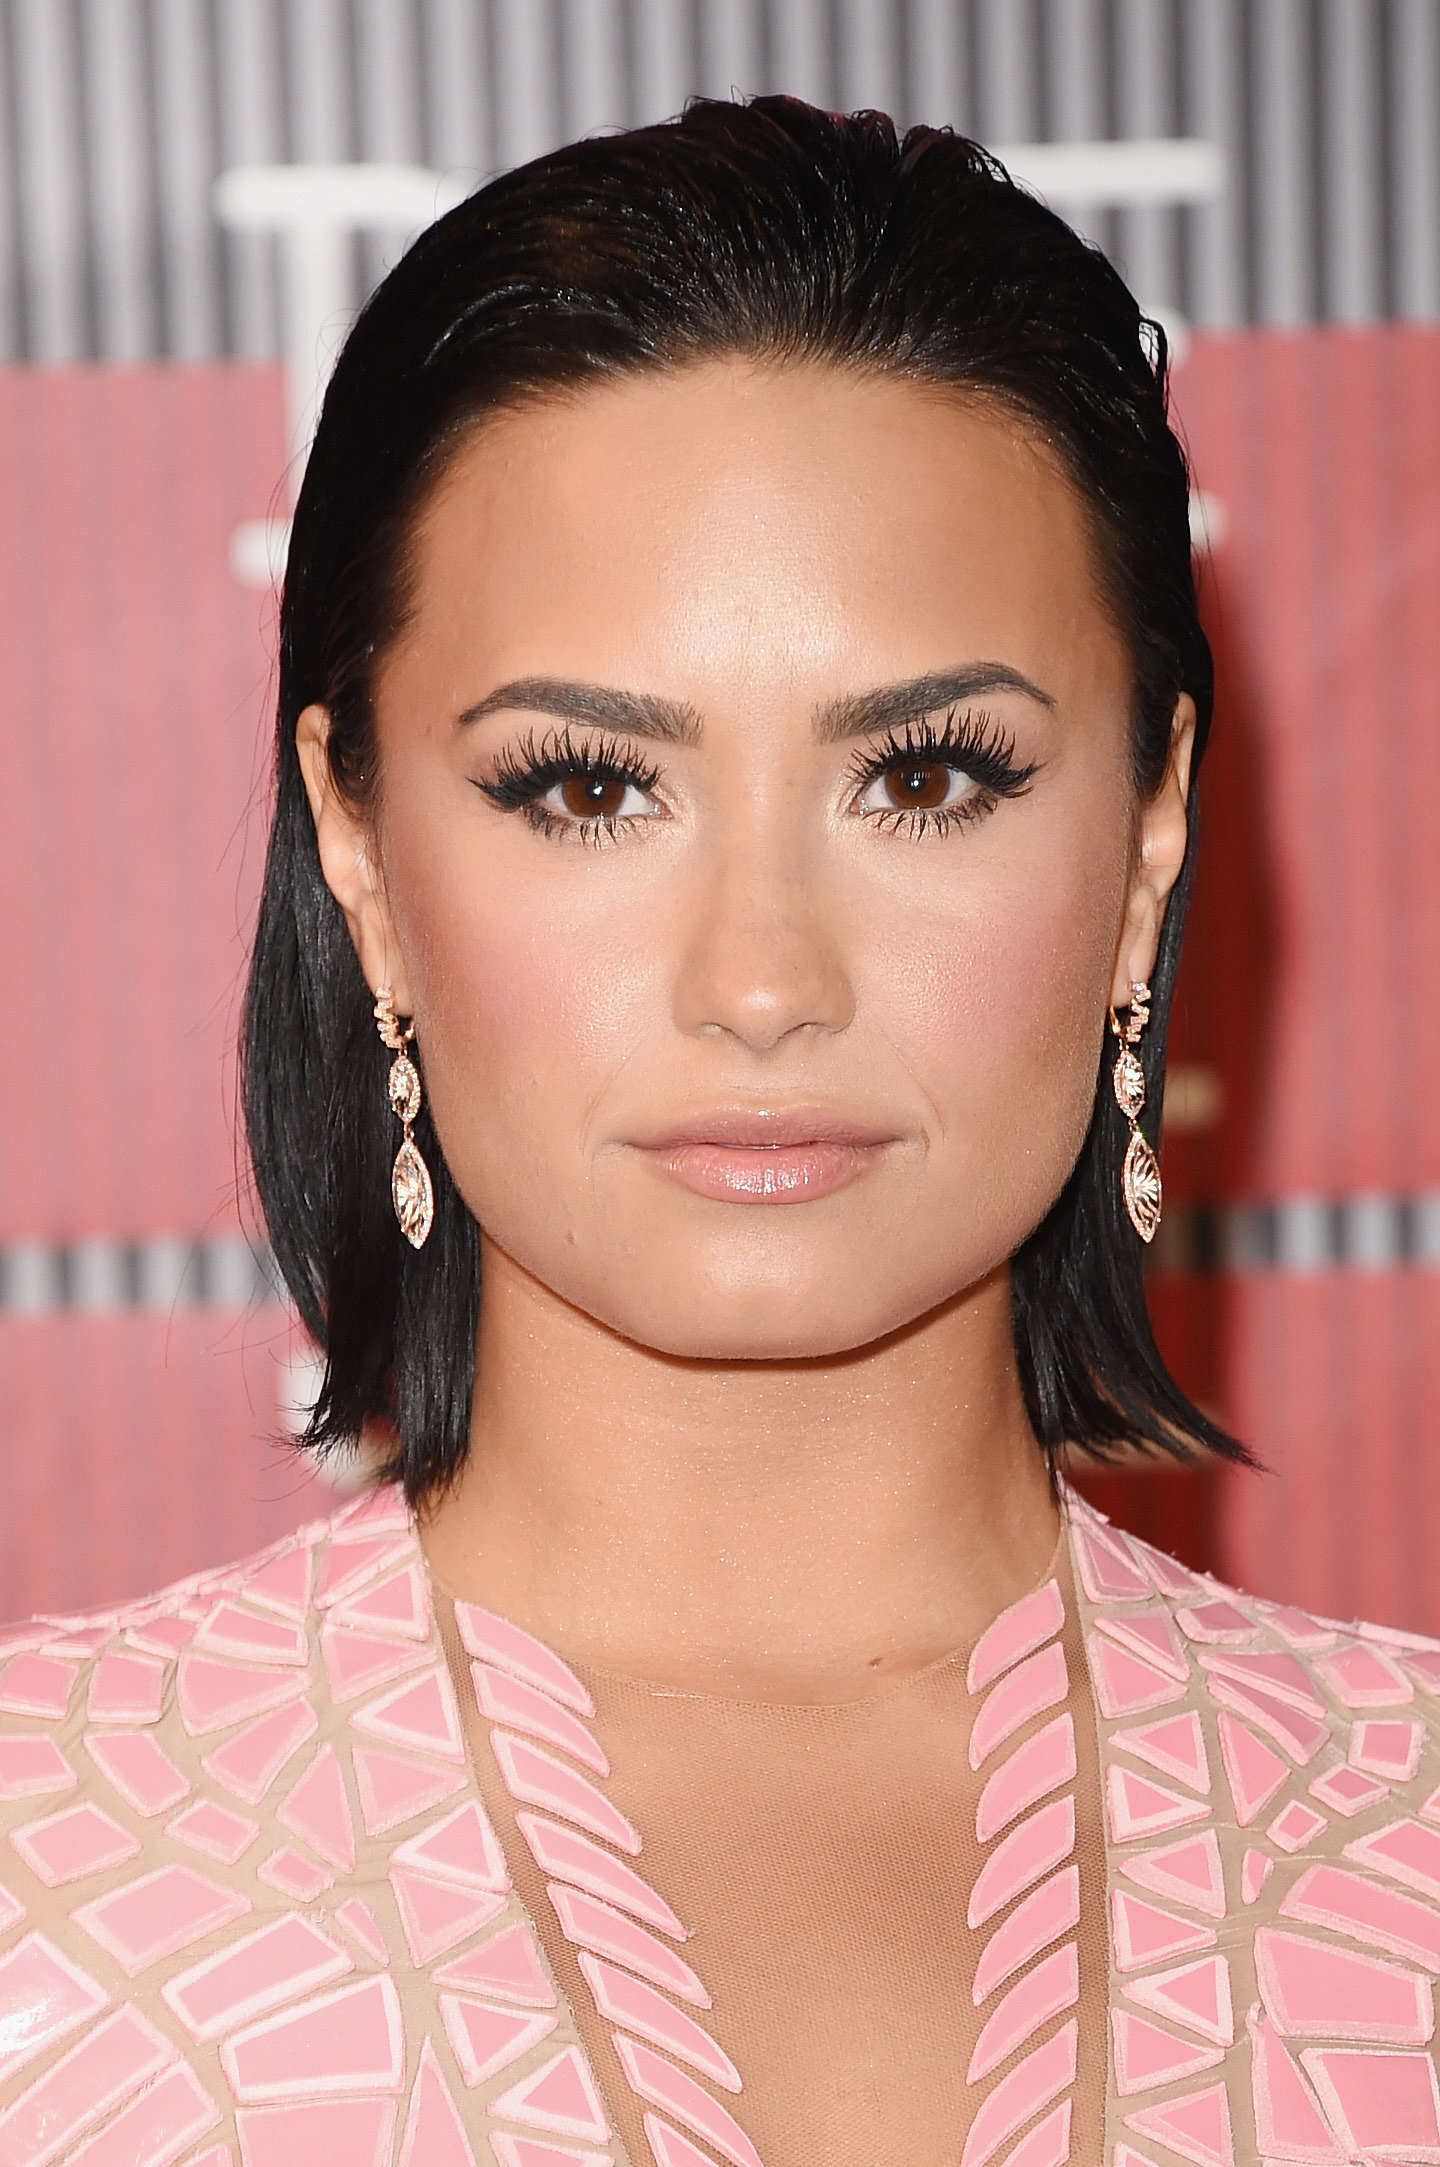 Celebs Who Look Amazing Without Makeup | Demi lovato 